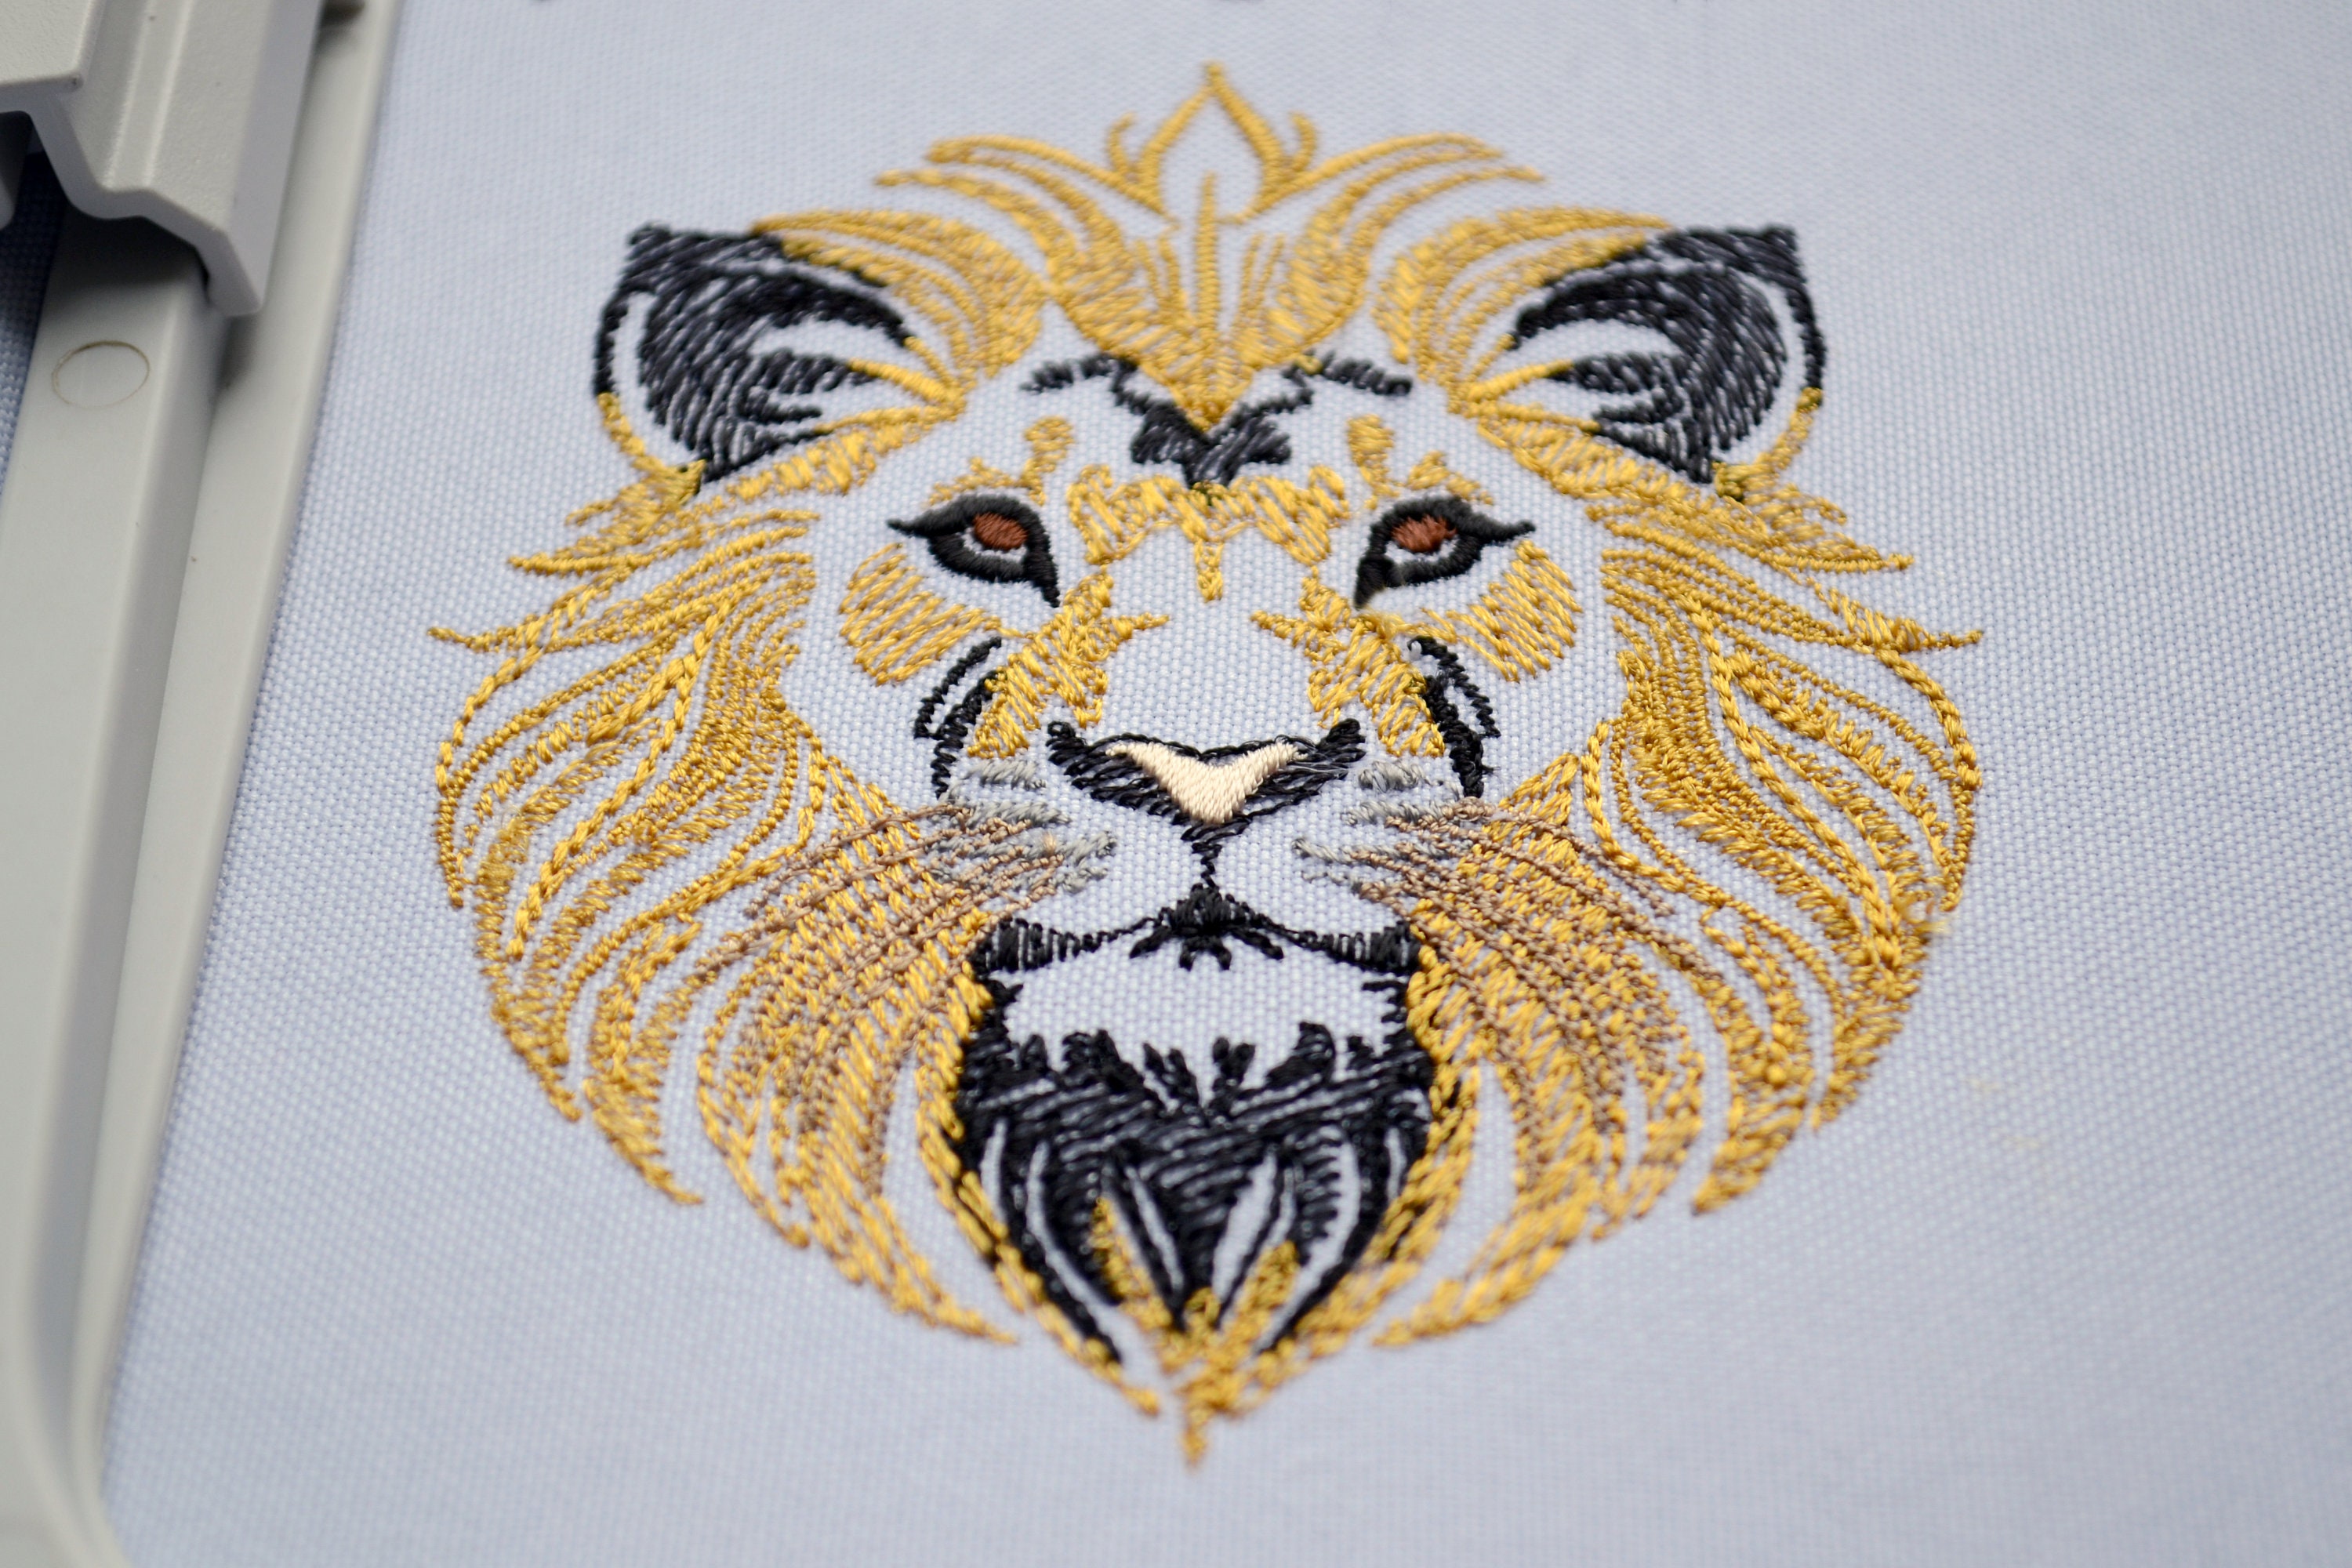 White Lion Head Embroidery Design, Sketch Stitch for Light-Colored